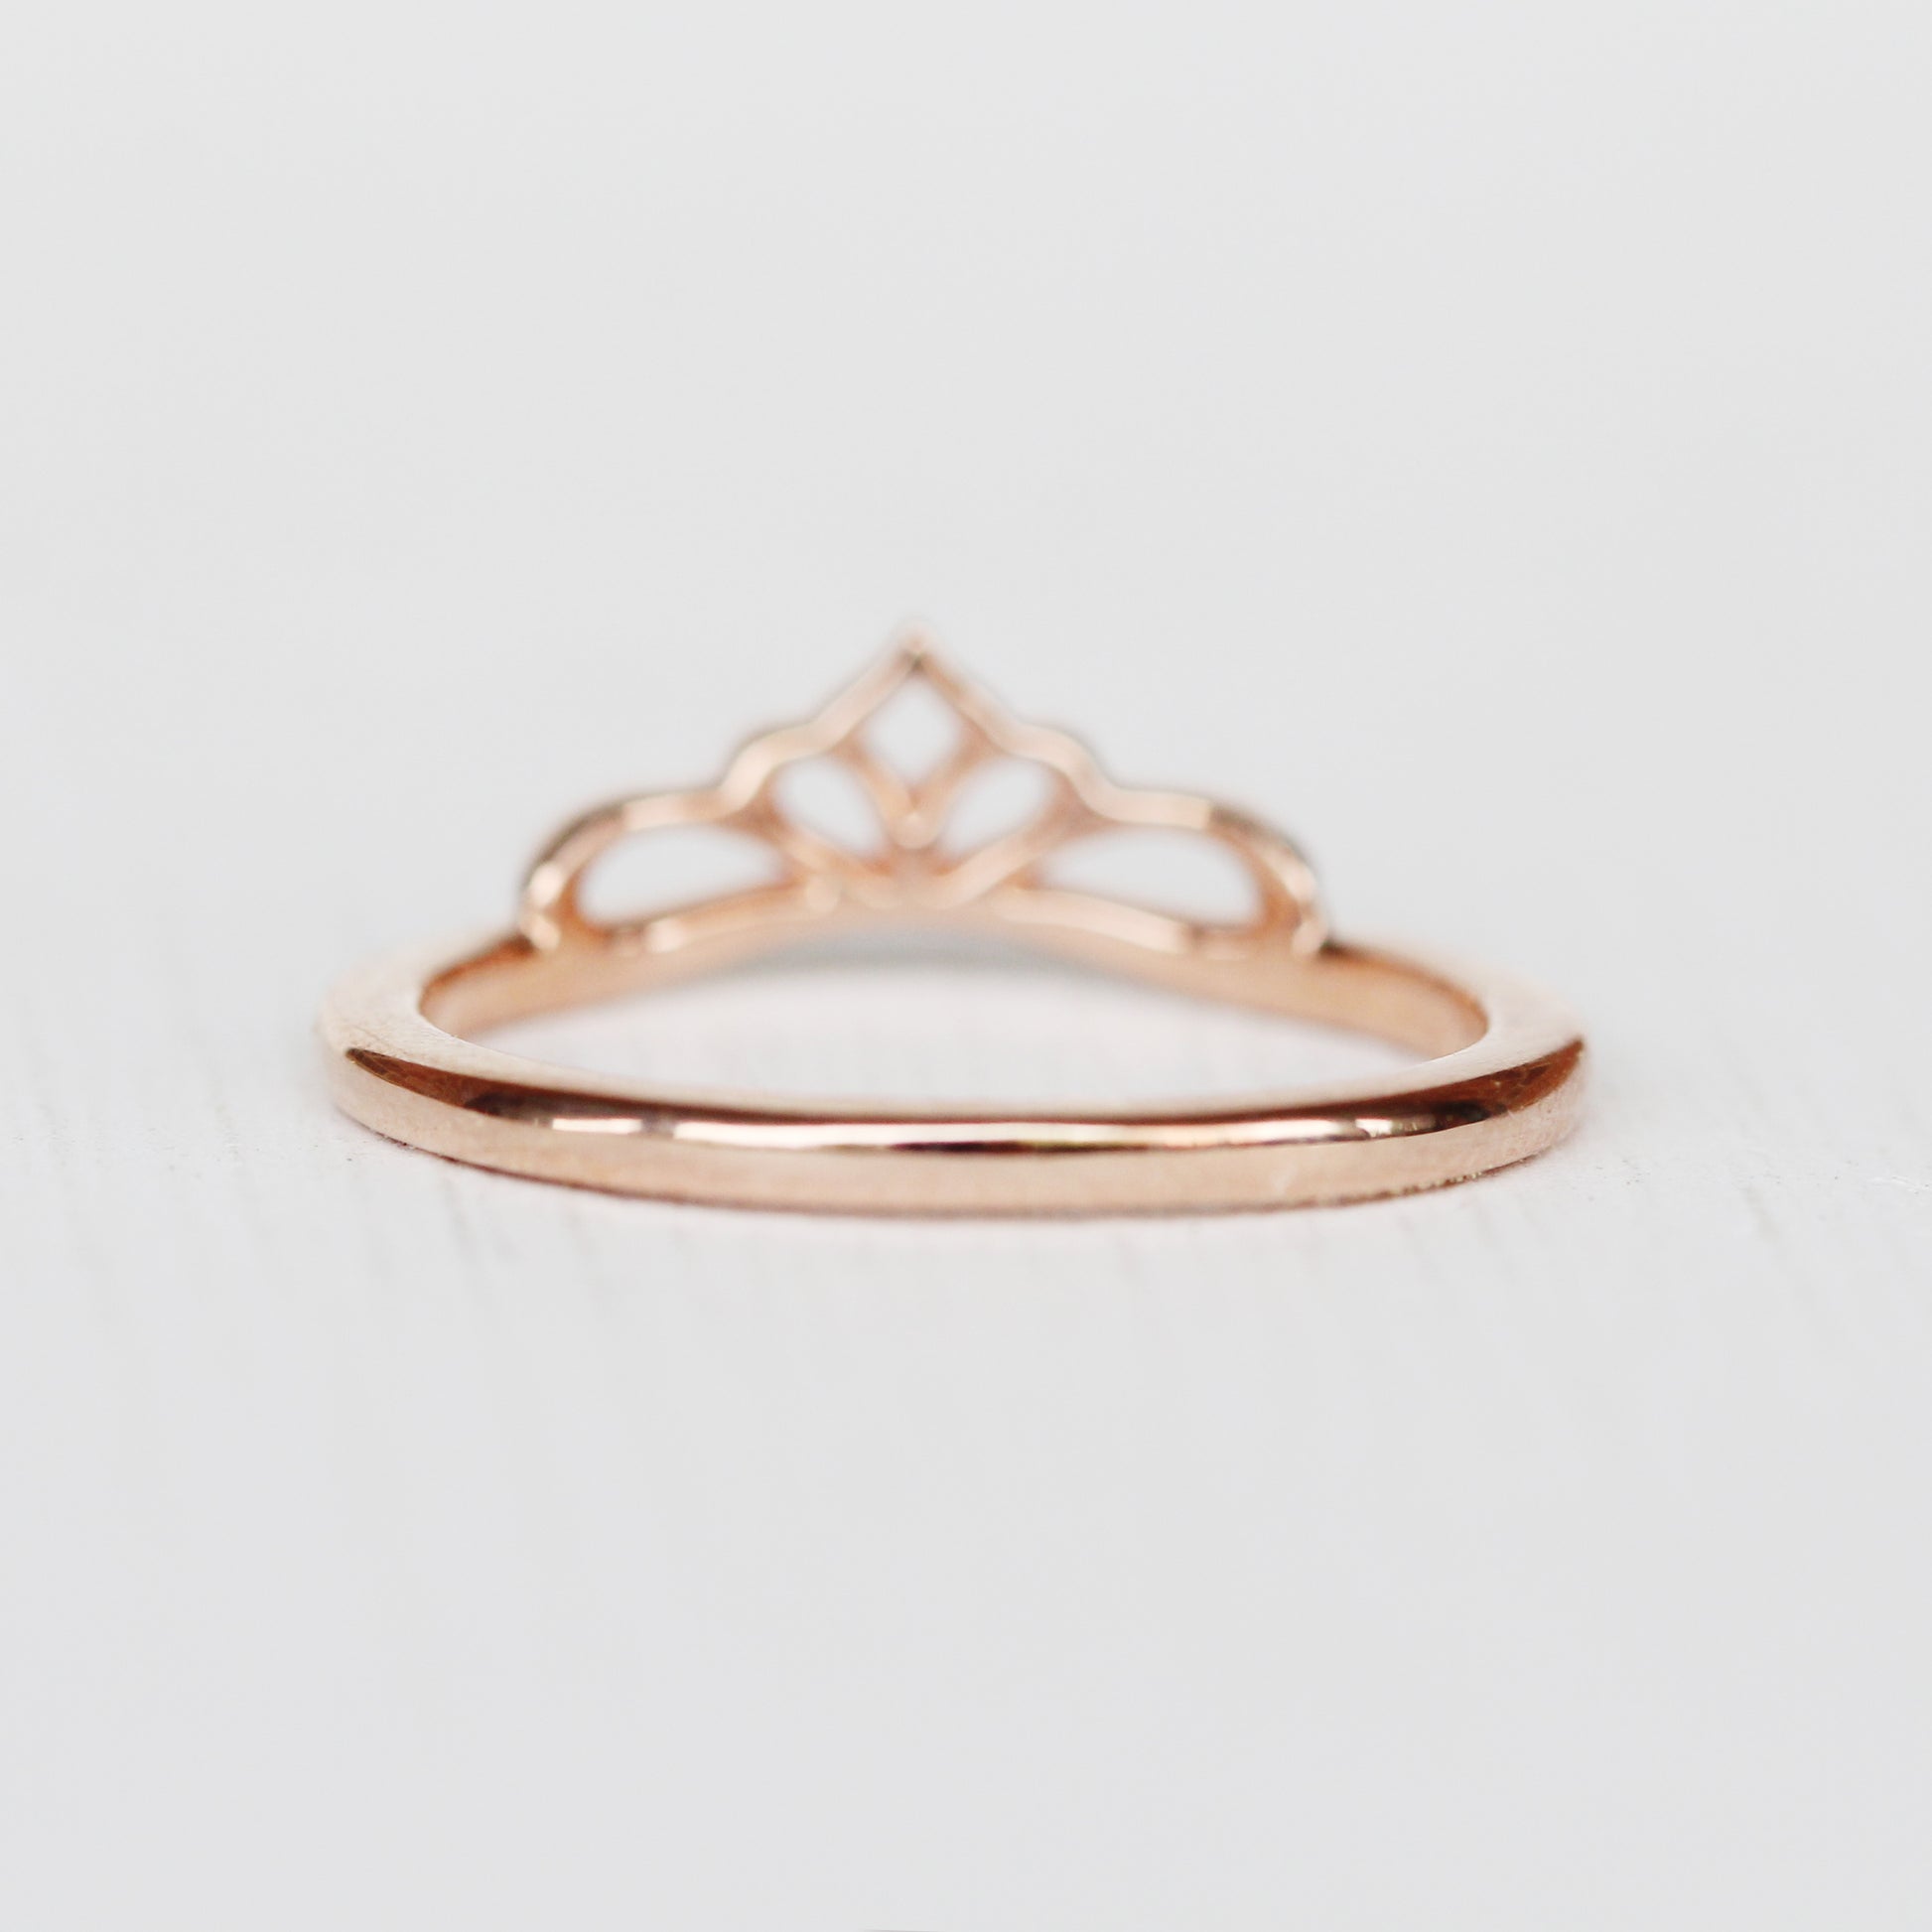 Liesbeth Ring -  Stackable band in 14k Gold - Made to Order - Midwinter Co. Alternative Bridal Rings and Modern Fine Jewelry